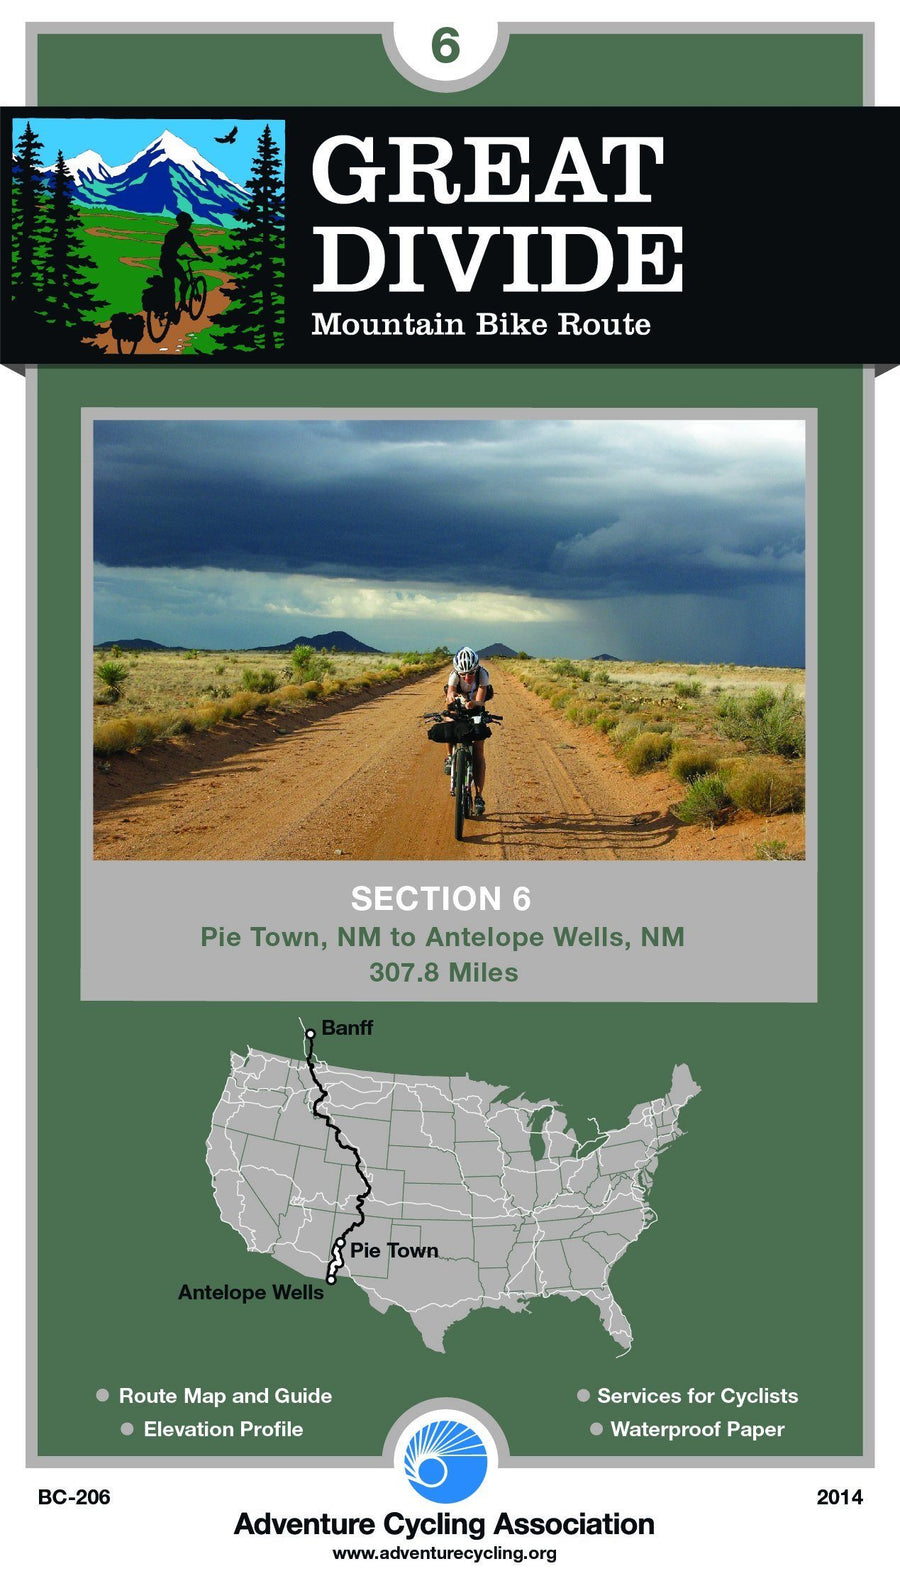 Great Divide Mountain Bike Route n° 6 - Pie Town, New Mexico - Antelope Wells, New Mexico (308 miles) | Adventure Cycling Association carte pliée Adventure Cycling Association 